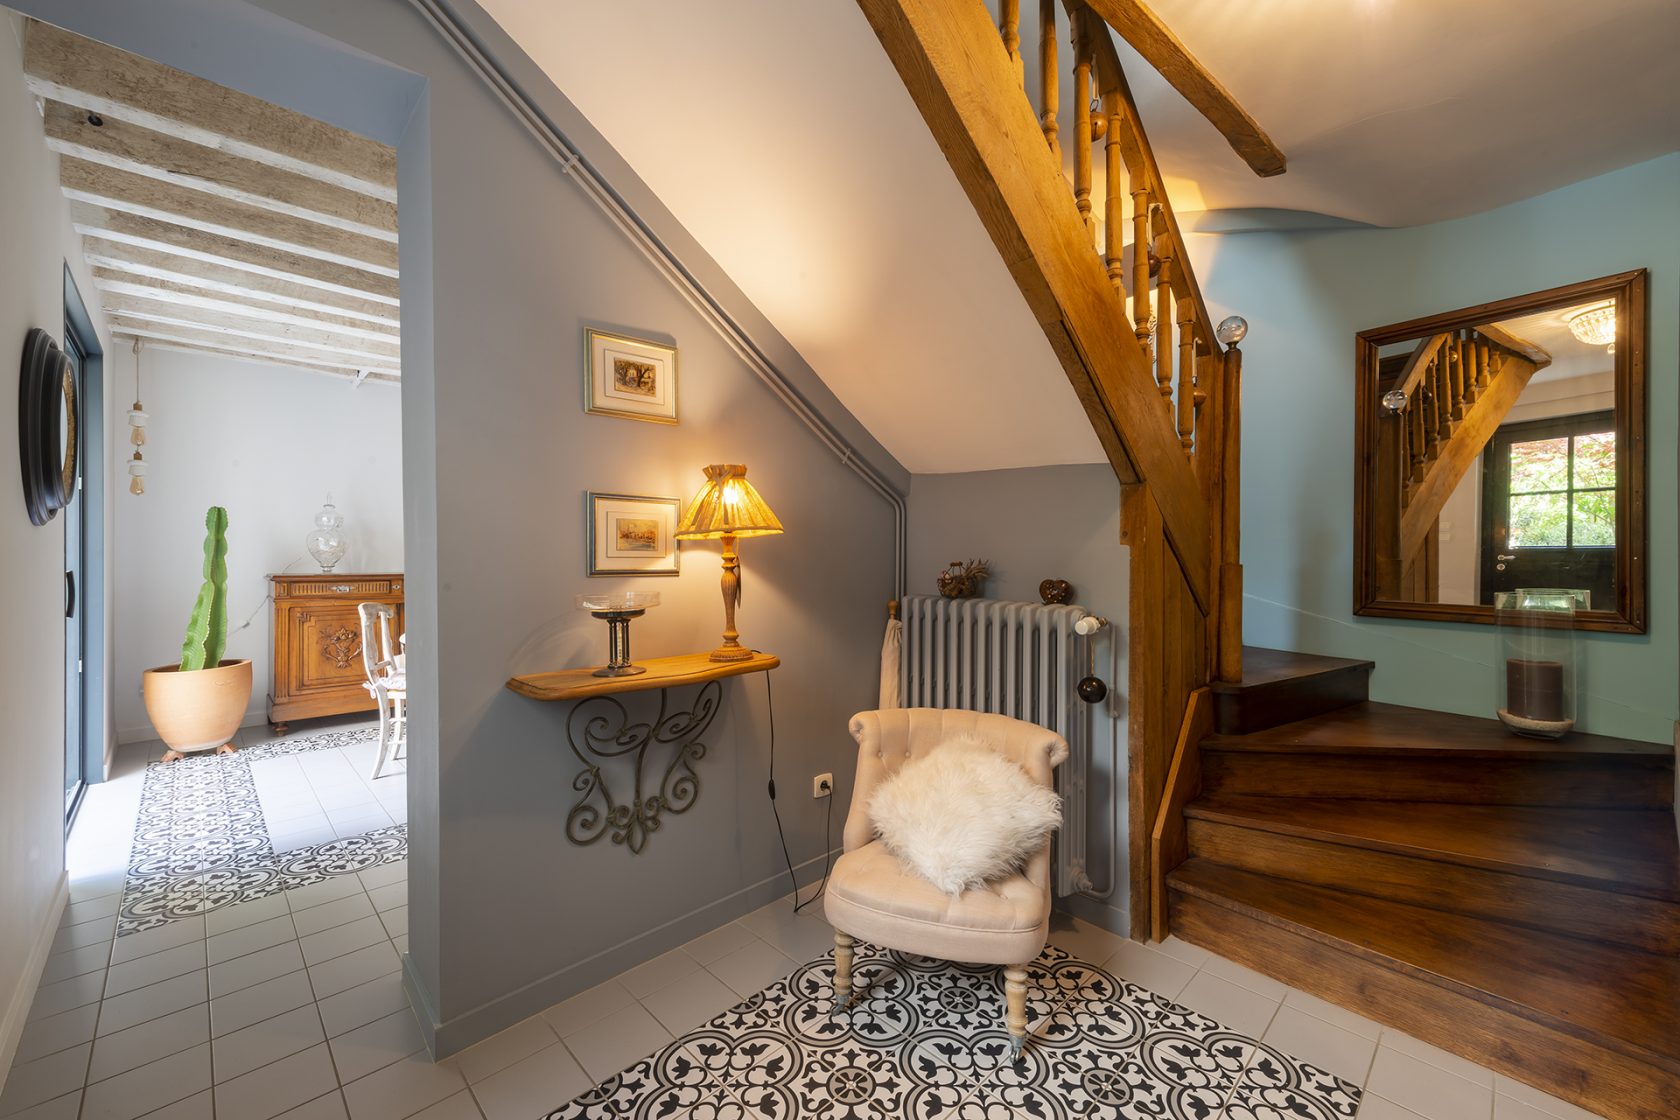 Charming renovated house in the heart of the town of Saumur.